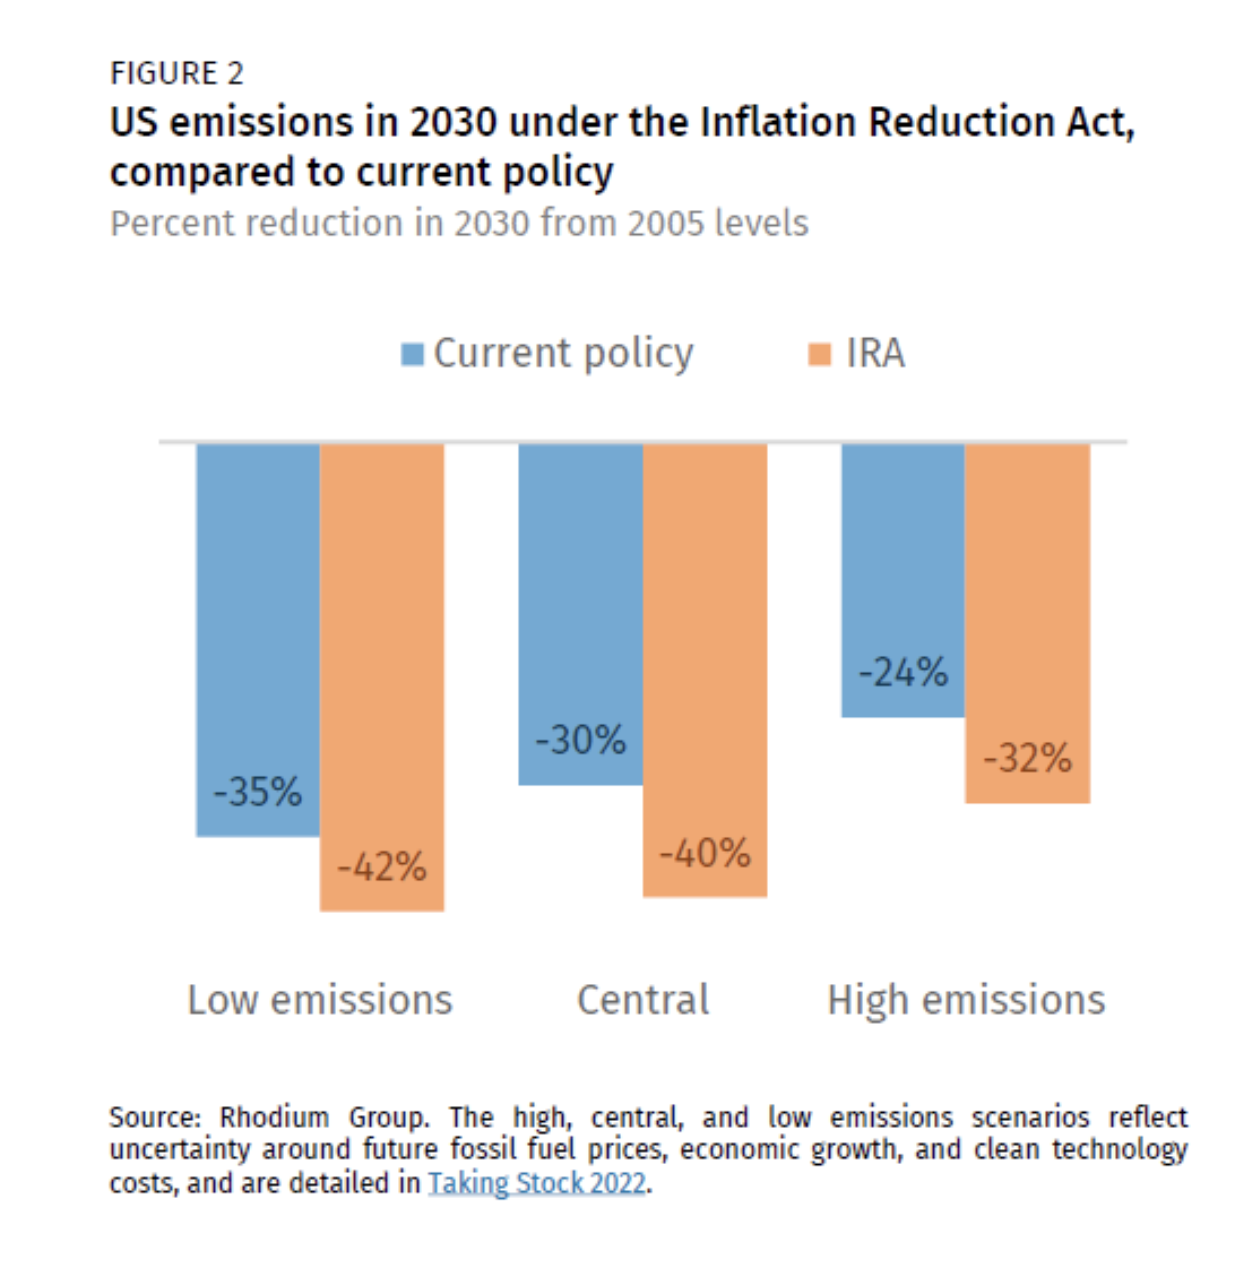 Projected US emissions reductions